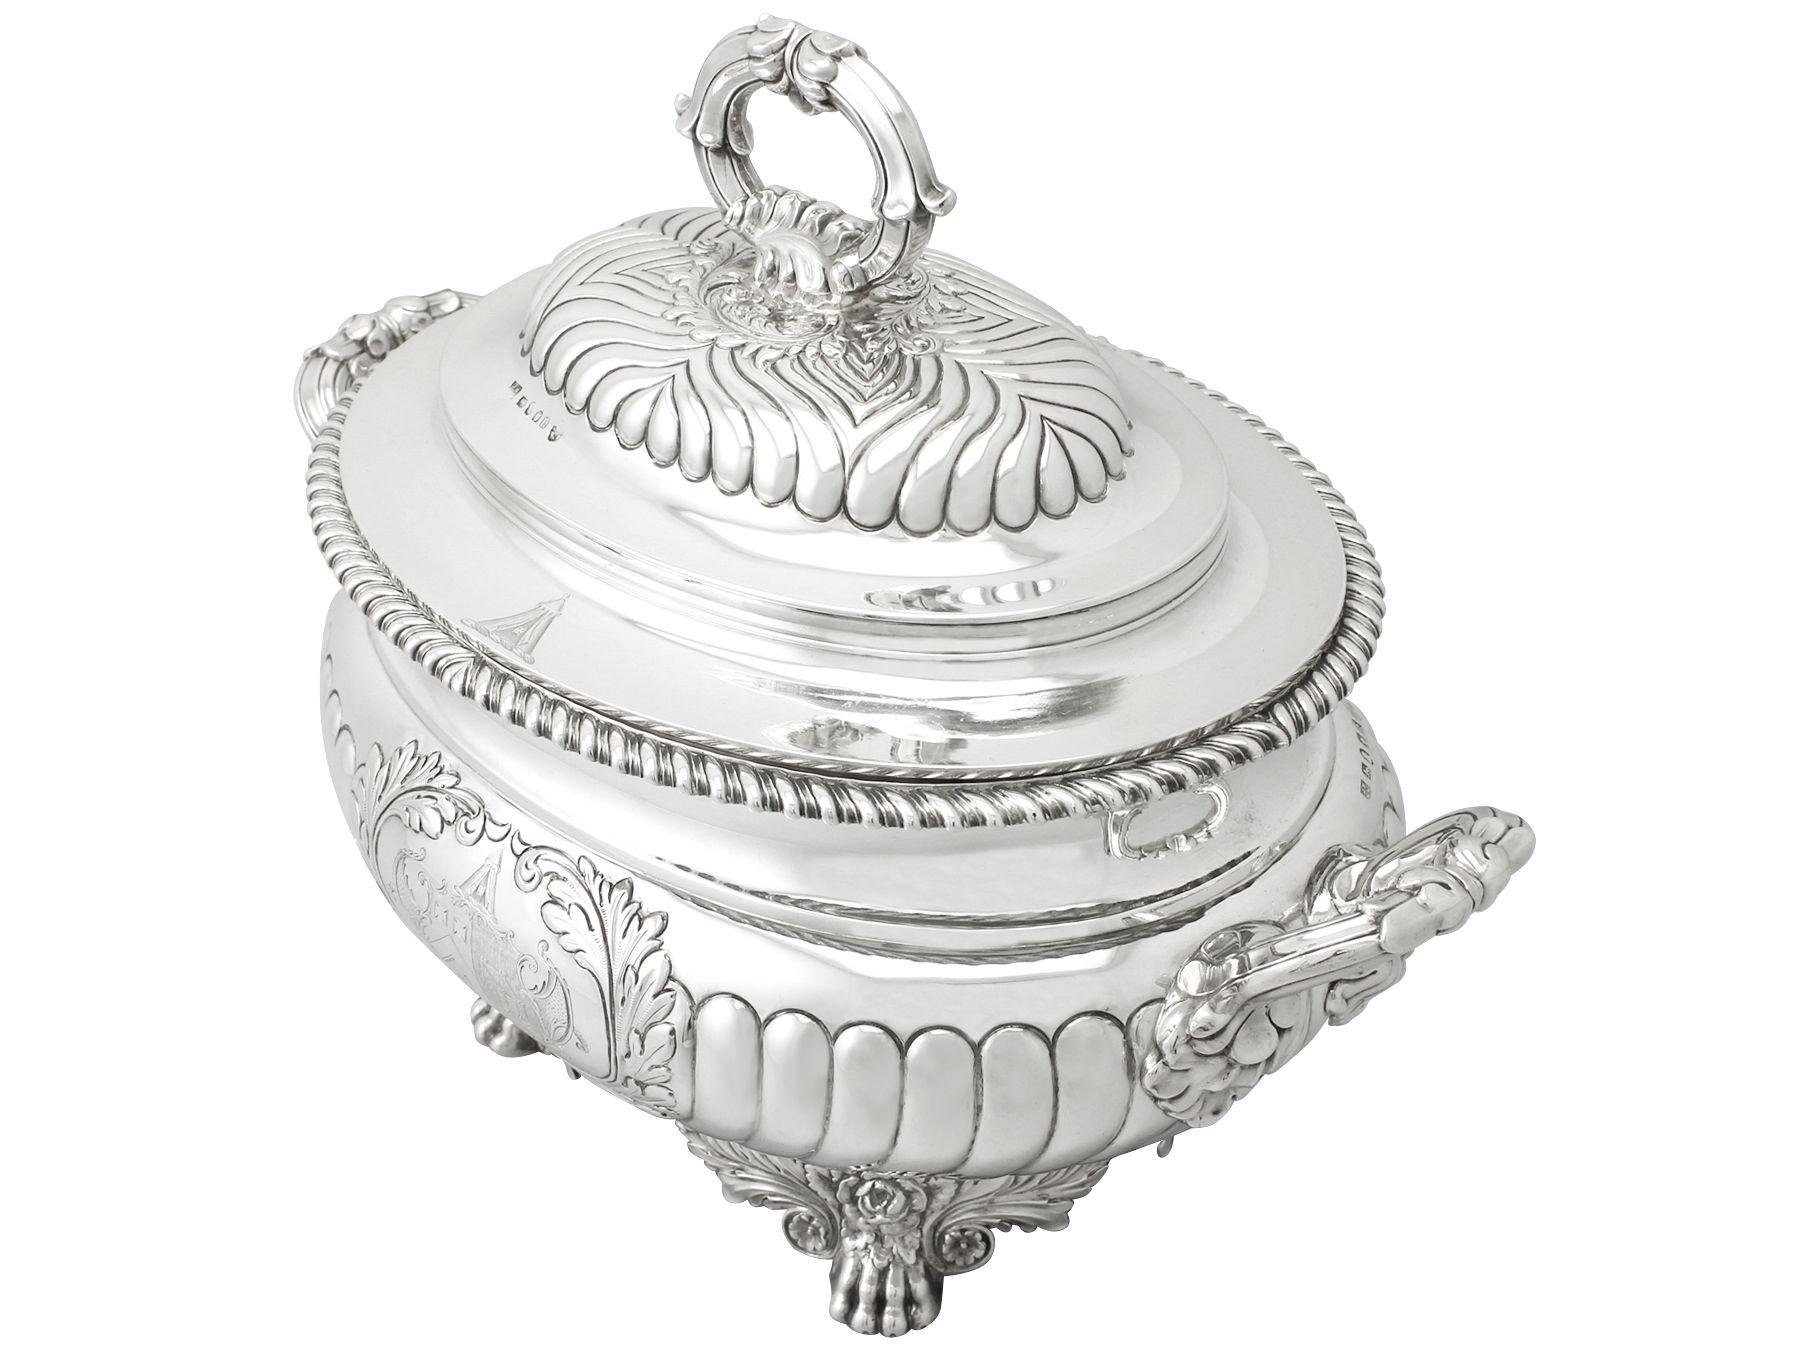 George IV Antique Sterling Silver Soup Tureen or Centerpiece For Sale